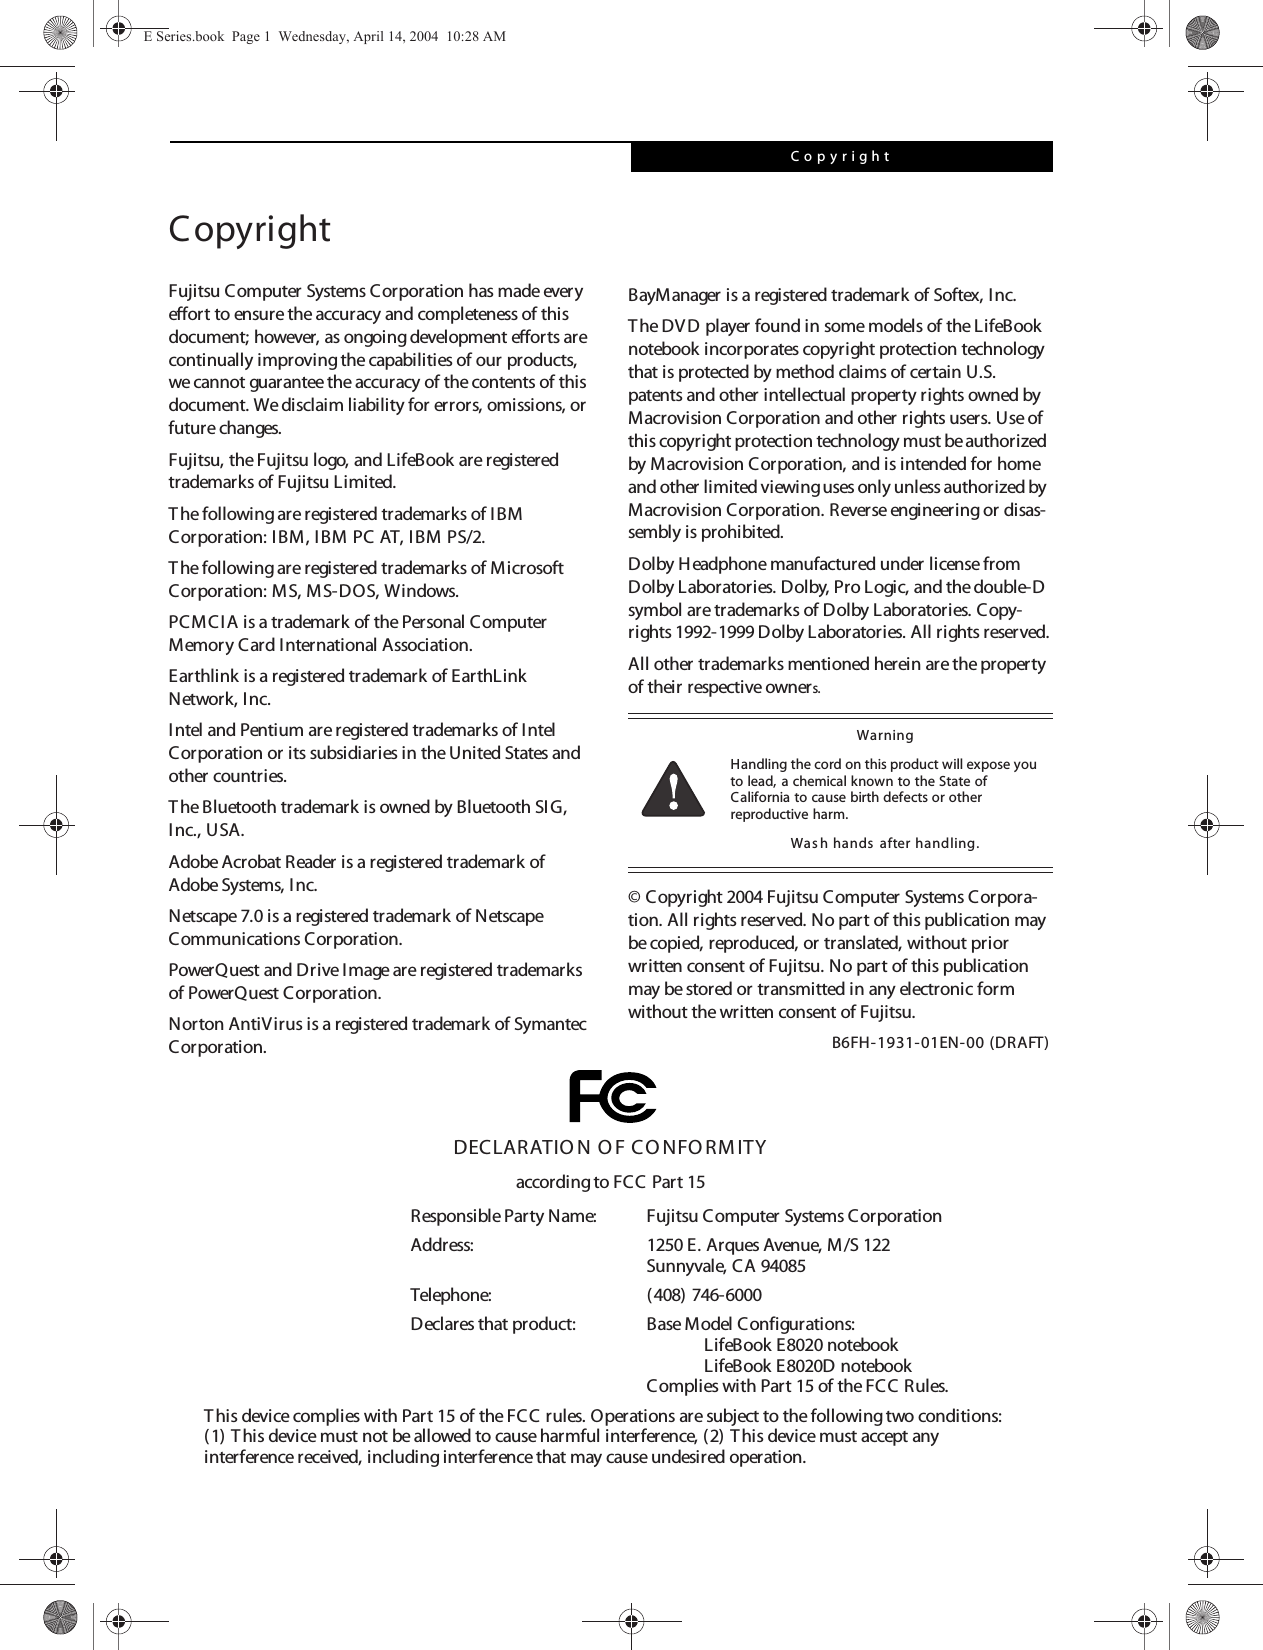 CopyrightCopyrightFujitsu Computer Systems Corporation has made every effort to ensure the accuracy and completeness of this document; however, as ongoing development efforts are continually improving the capabilities of our products, we cannot guarantee the accuracy of the contents of this document. We disclaim liability for errors, omissions, or future changes.Fujitsu, the Fujitsu logo, and LifeBook are registered trademarks of Fujitsu Limited.The following are registered trademarks of IBM Corporation: IBM, IBM PC AT, IBM PS/2. The following are registered trademarks of Microsoft Corporation: MS, MS-DOS, Windows.PCMCI A is a trademark of the Personal Computer Memory Card International Association.Earthlink is a registered trademark of EarthLink Network, Inc. Intel and Pentium are registered trademarks of Intel Corporation or its subsidiaries in the United States and other countries.The Bluetooth trademark is owned by Bluetooth SIG, Inc., USA.Adobe Acrobat Reader is a registered trademark of Adobe Systems, Inc.Netscape 7.0 is a registered trademark of Netscape Communications Corporation.PowerQuest and Drive Image are registered trademarks of PowerQuest Corporation.Norton AntiVirus is a registered trademark of Symantec Corporation.BayManager is a registered trademark of Softex, Inc.The DV D player found in some models of the LifeBook notebook incorporates copyright protection technology that is protected by method claims of certain U.S. patents and other intellectual property rights owned by Macrovision Corporation and other rights users. Use of this copyright protection technology must be authorized by Macrovision Corporation, and is intended for home and other limited viewing uses only unless authorized by Macrovision Corporation. Reverse engineering or disas-sembly is prohibited.Dolby Headphone manufactured under license from Dolby Laboratories. Dolby, Pro Logic, and the double-D symbol are trademarks of Dolby Laboratories. Copy-rights 1992-1999 Dolby Laboratories. All rights reserved.All other trademarks mentioned herein are the property of their respective owners.© Copyright 2004 Fujitsu Computer Systems Corpora-tion. All rights reserved. No part of this publication may be copied, reproduced, or translated, without prior written consent of Fujitsu. No part of this publication may be stored or transmitted in any electronic form without the written consent of Fujitsu.B6FH-1931-01EN-00 (DRAFT)War ningHandling the cord on this product will expose you to lead, a chemical known to the State of California to cause birth defects or other reproductive harm. Was h hands  after handling.DECLARATIO N O F CO NFO RM ITYaccording to FCC Part 15Responsible Party Name: Fujitsu Computer Systems CorporationAddress:  1250 E. Arques Avenue, M/S 122Sunnyvale, CA 94085Telephone: (408) 746-6000Declares that product: Base Model Configurations:LifeBook E8020 notebookLifeBook E8020D notebookComplies with Part 15 of the FCC Rules.This device complies with Part 15 of the FCC rules. Operations are subject to the following two conditions:(1) T his device must not be allowed to cause harmful interference, (2) This device must accept anyinterference received, including interference that may cause undesired operation.E Series.book  Page 1  Wednesday, April 14, 2004  10:28 AM